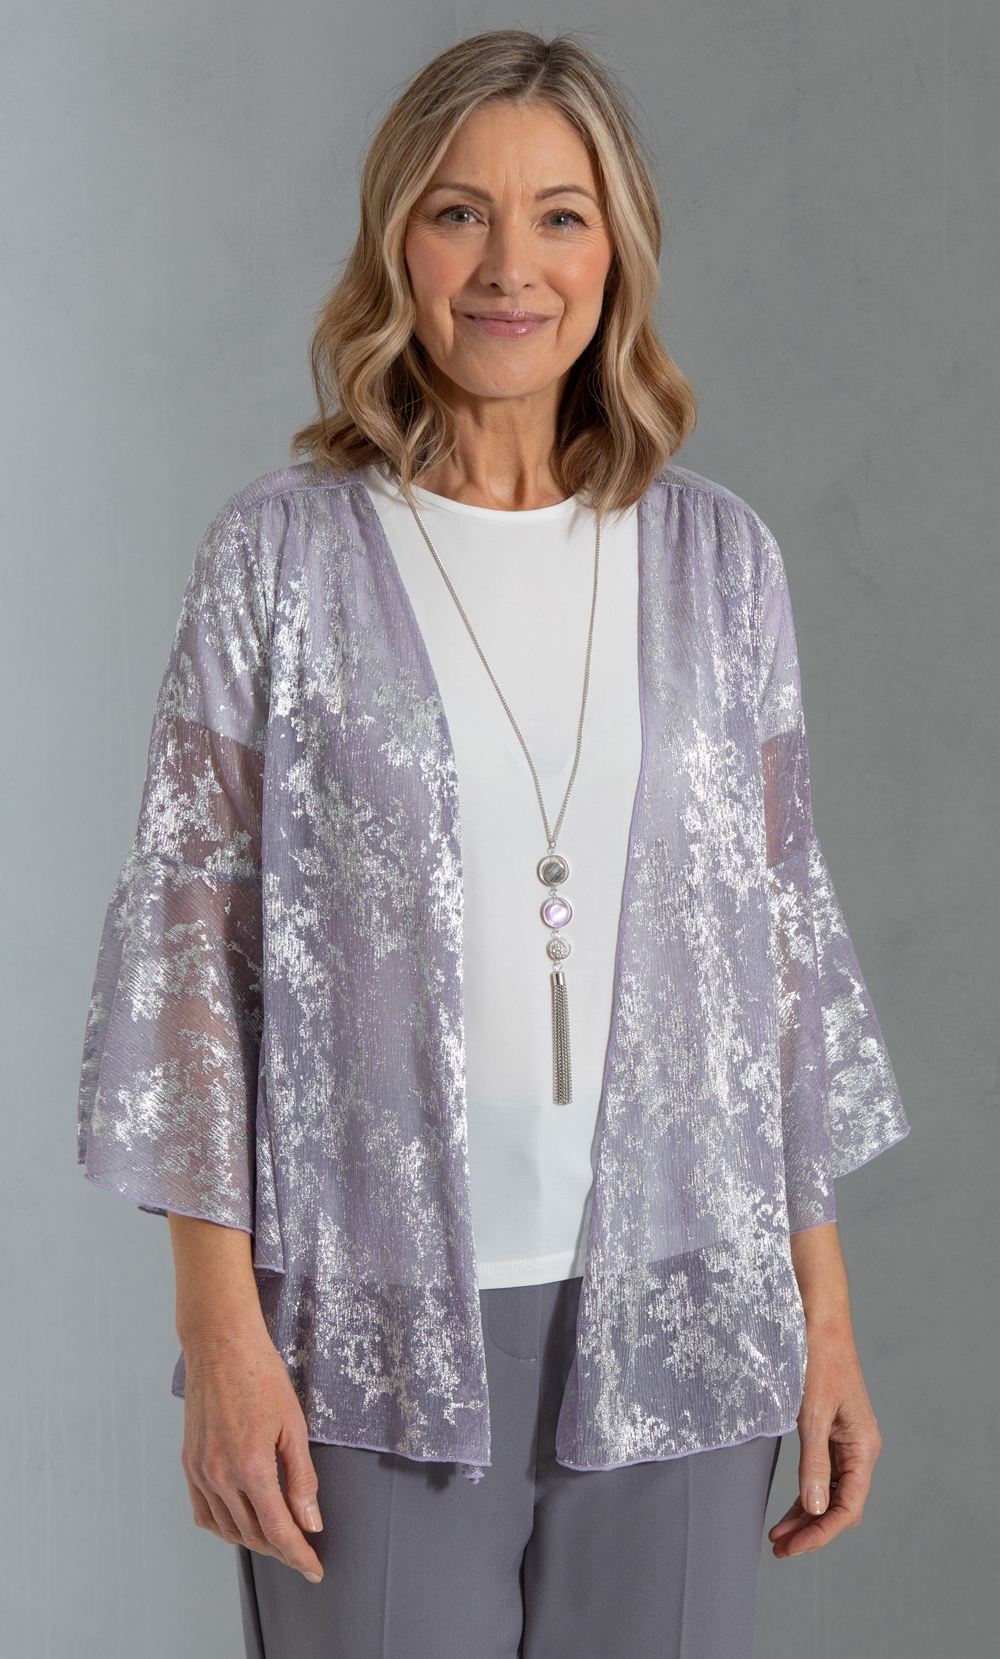 Brands - Anna Rose Anna Rose Top And Cover Up With Necklace Lavender/Silver Women’s